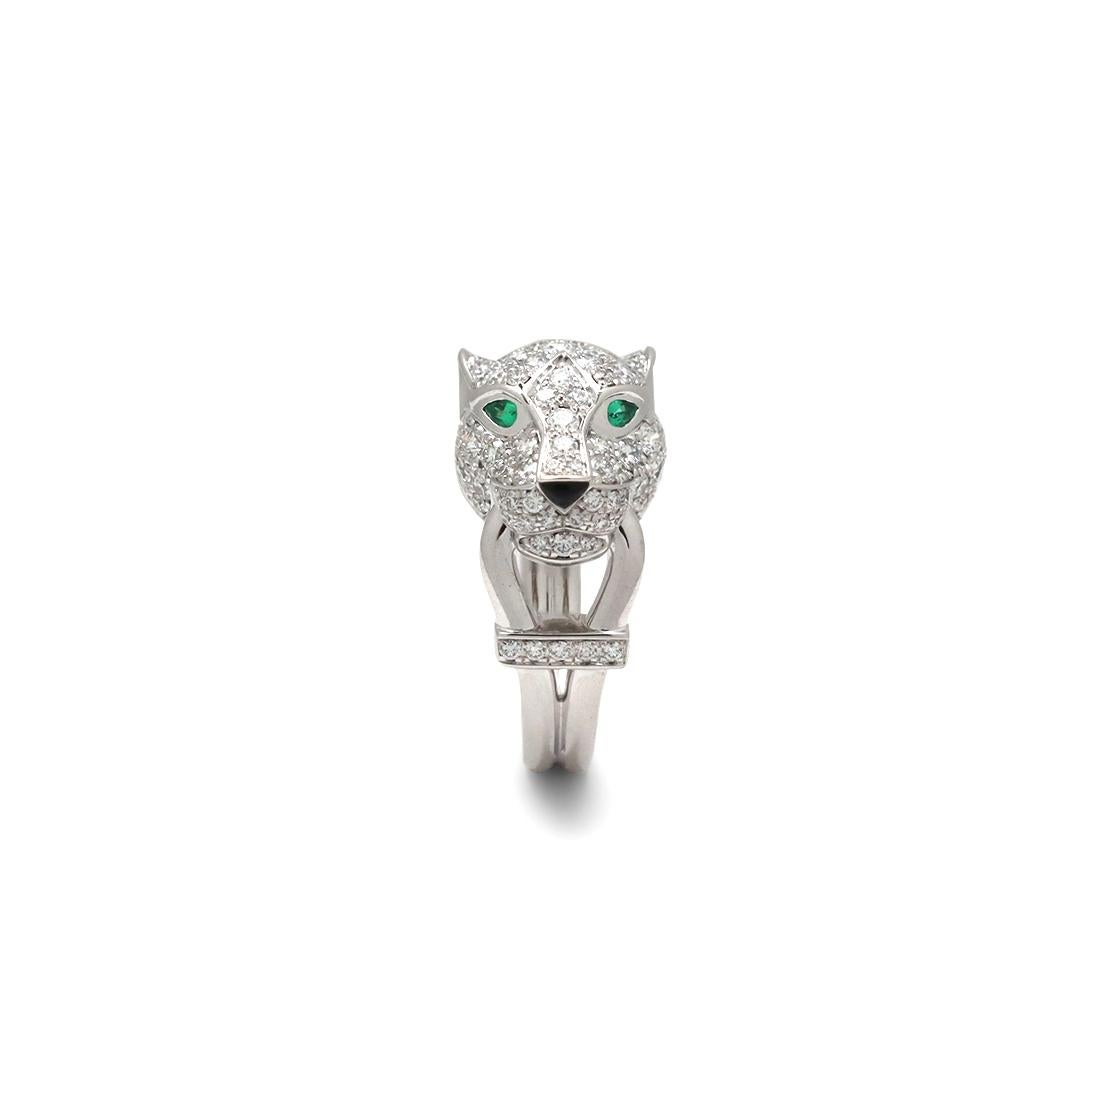 Authentic Panthère de Cartier ring crafted in 18 karat white gold and set with approximately 0.75 carats of round brilliant cut diamonds throughout the head of the panther. The panther head is completed with emerald eyes and a carved black onyx